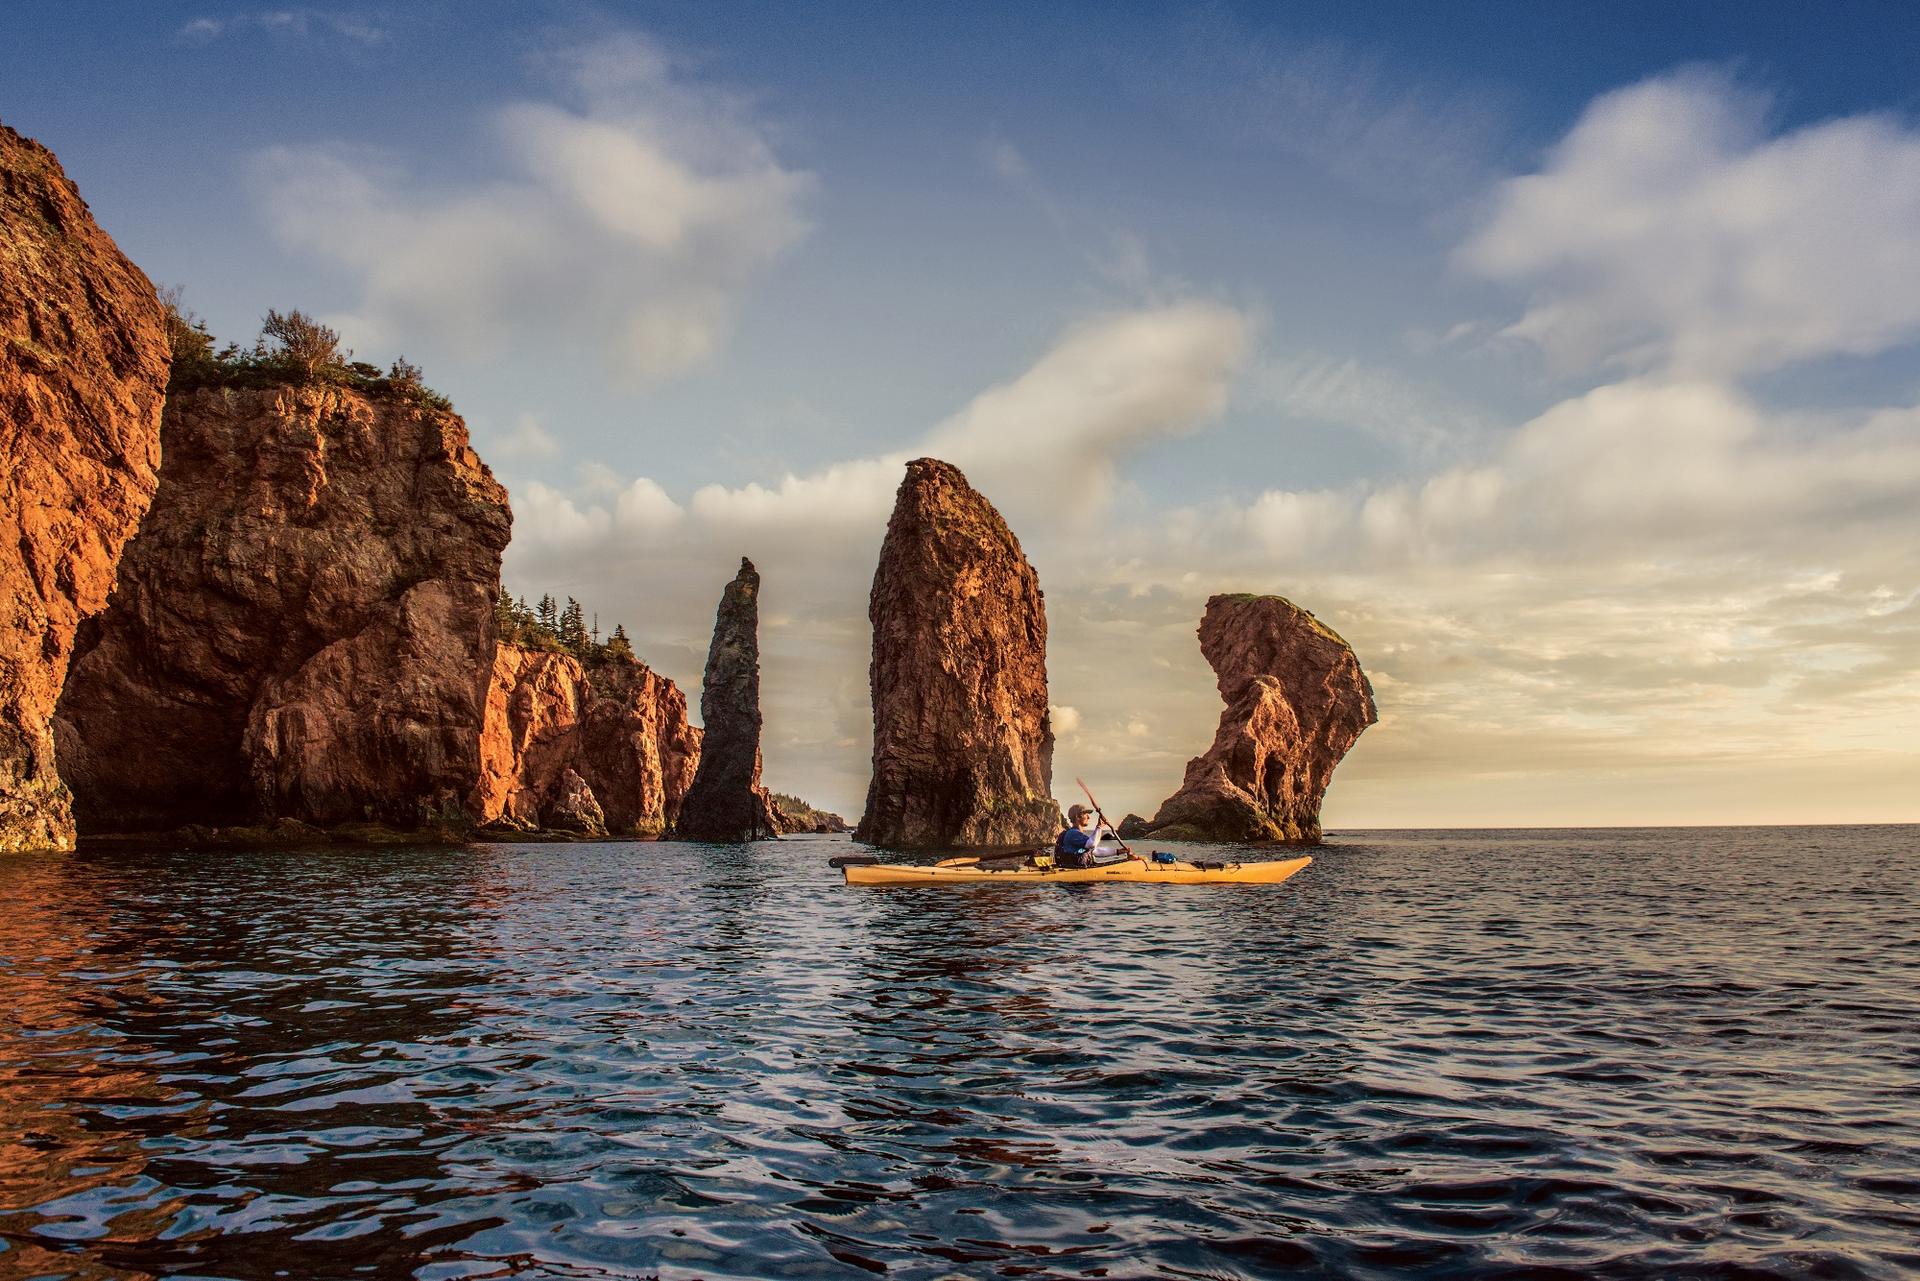 Kayaking on the Bay of Fundy